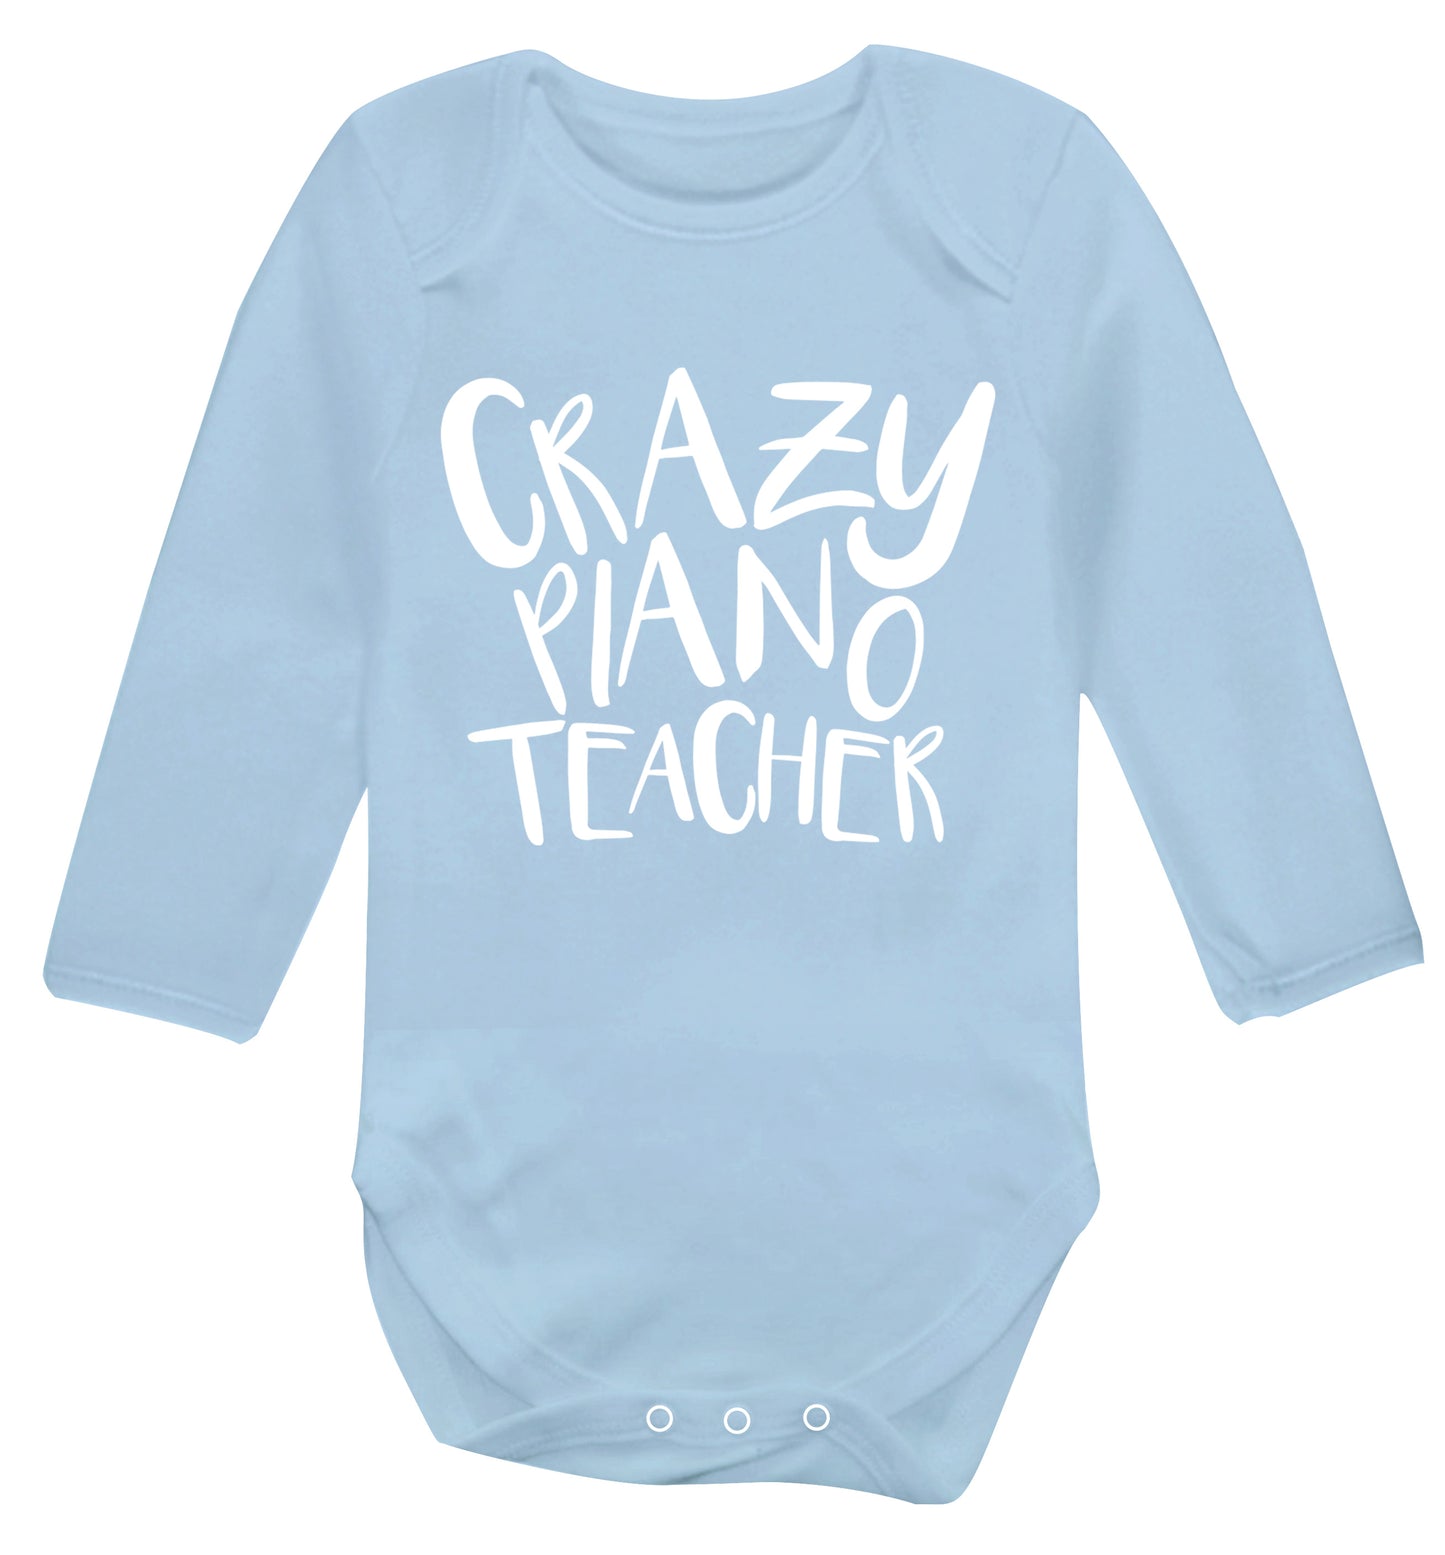 Crazy piano teacher Baby Vest long sleeved pale blue 6-12 months